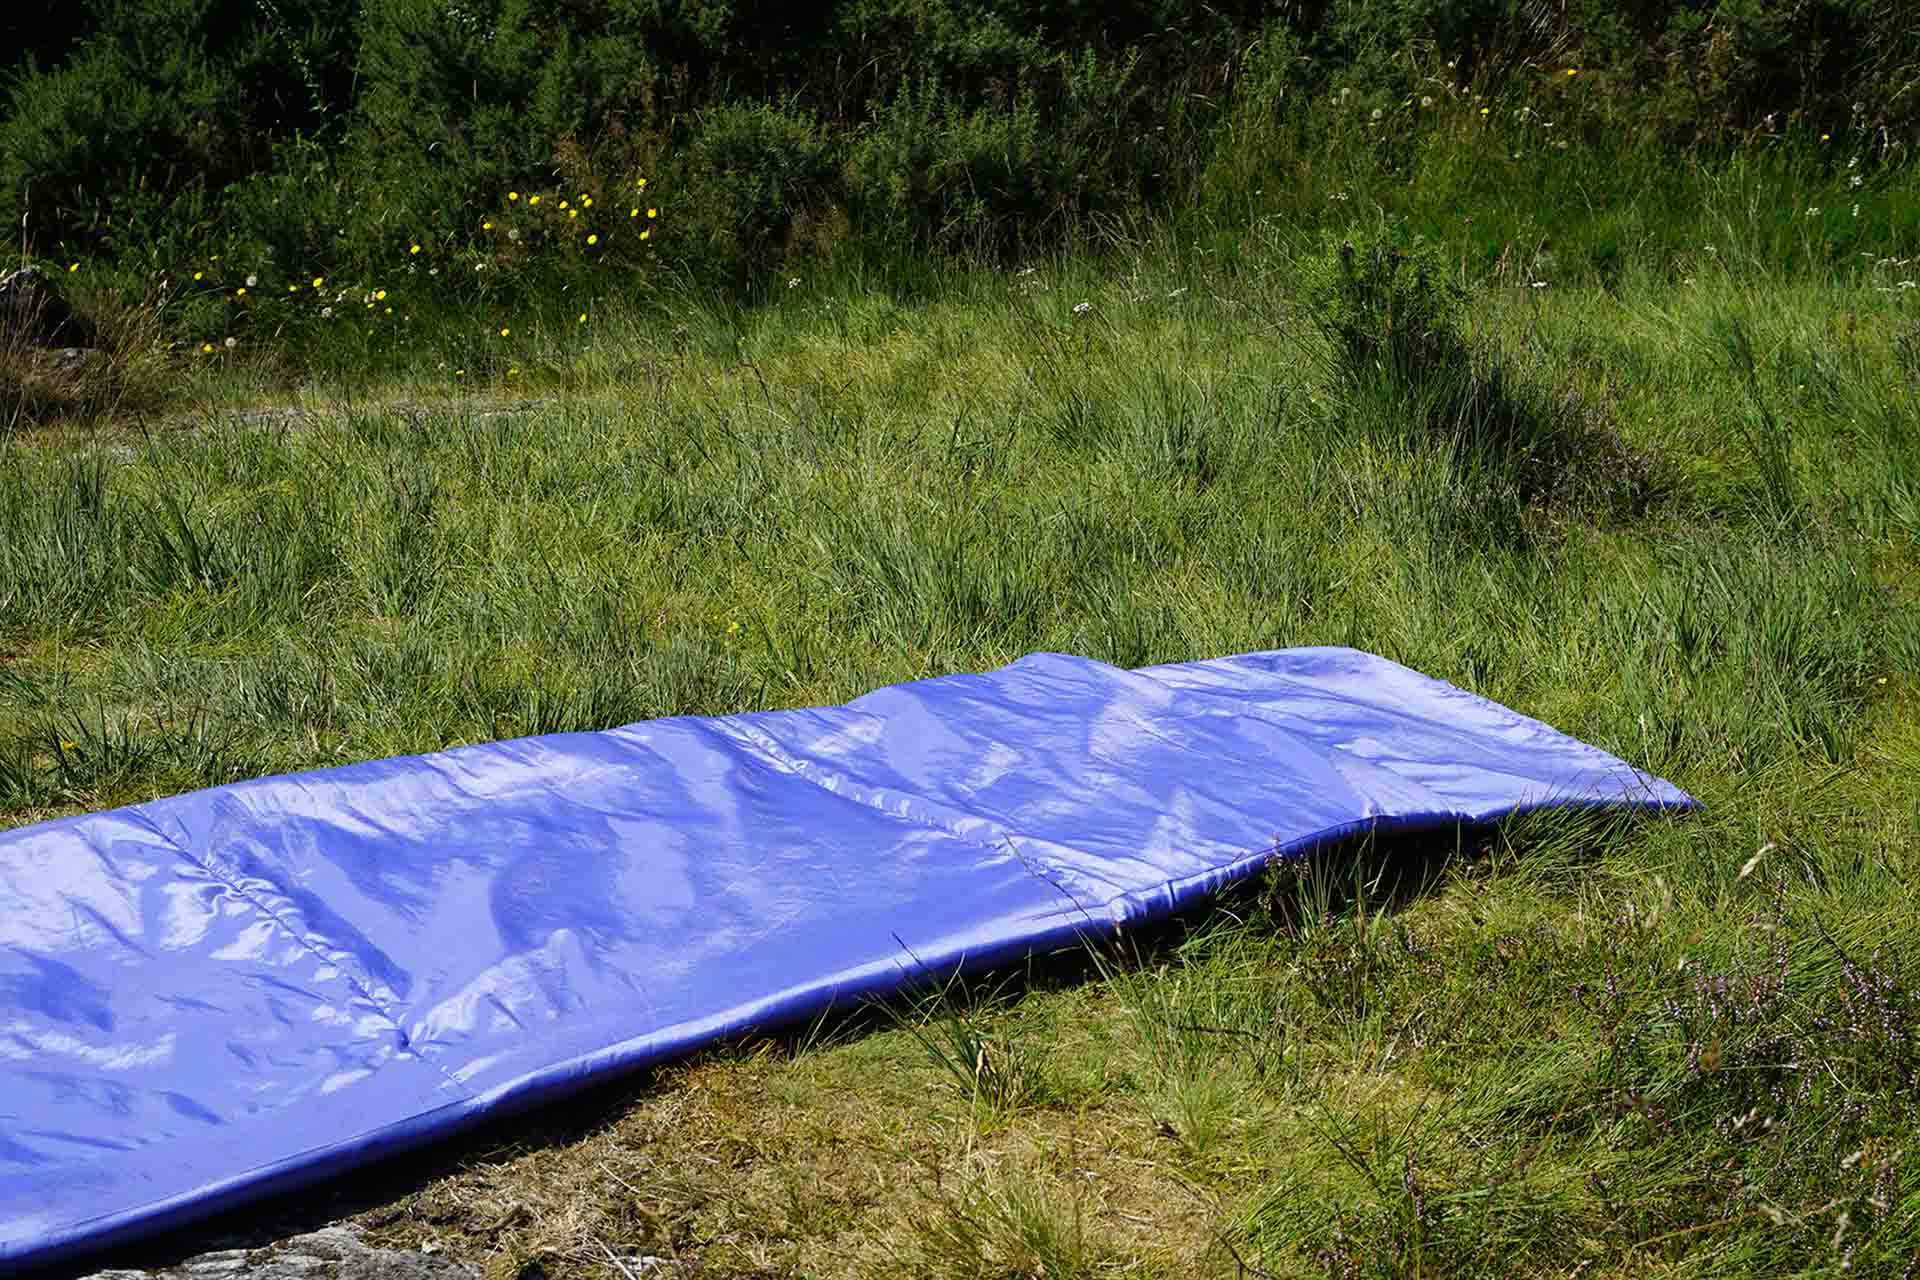 Lilac two toned stuffed taffeta in the shape of a sleeping bag wind sock hybrid two tone lilac soft sculpture placed on the ground that is a vivid shade of green due to the long summer grass